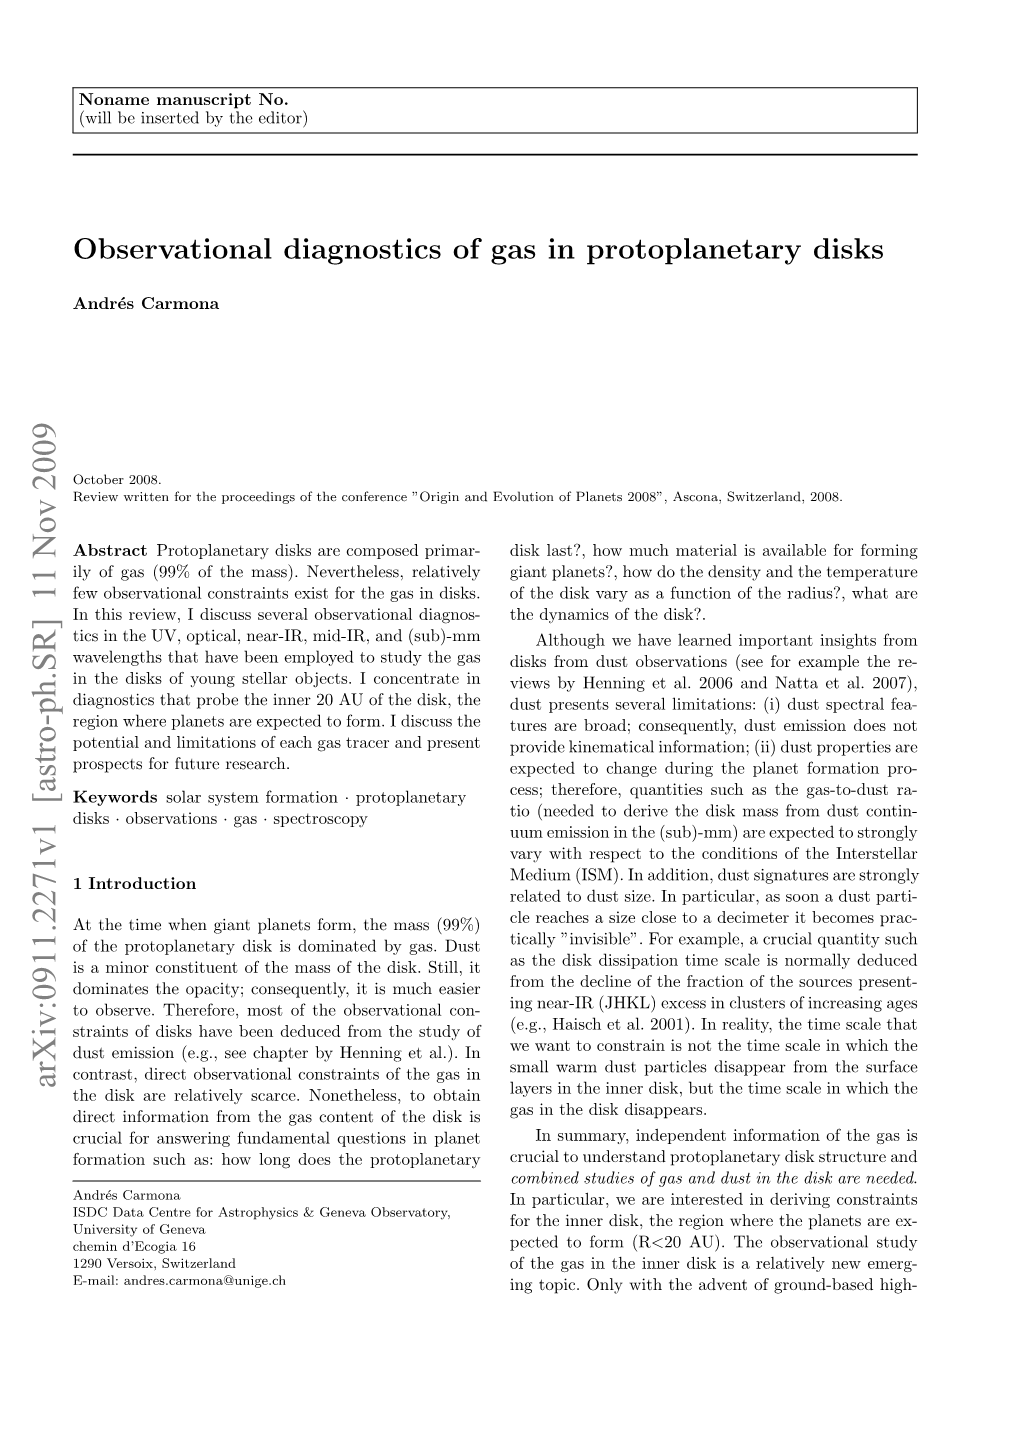 Observational Diagnostics of Gas in Protoplanetary Disks